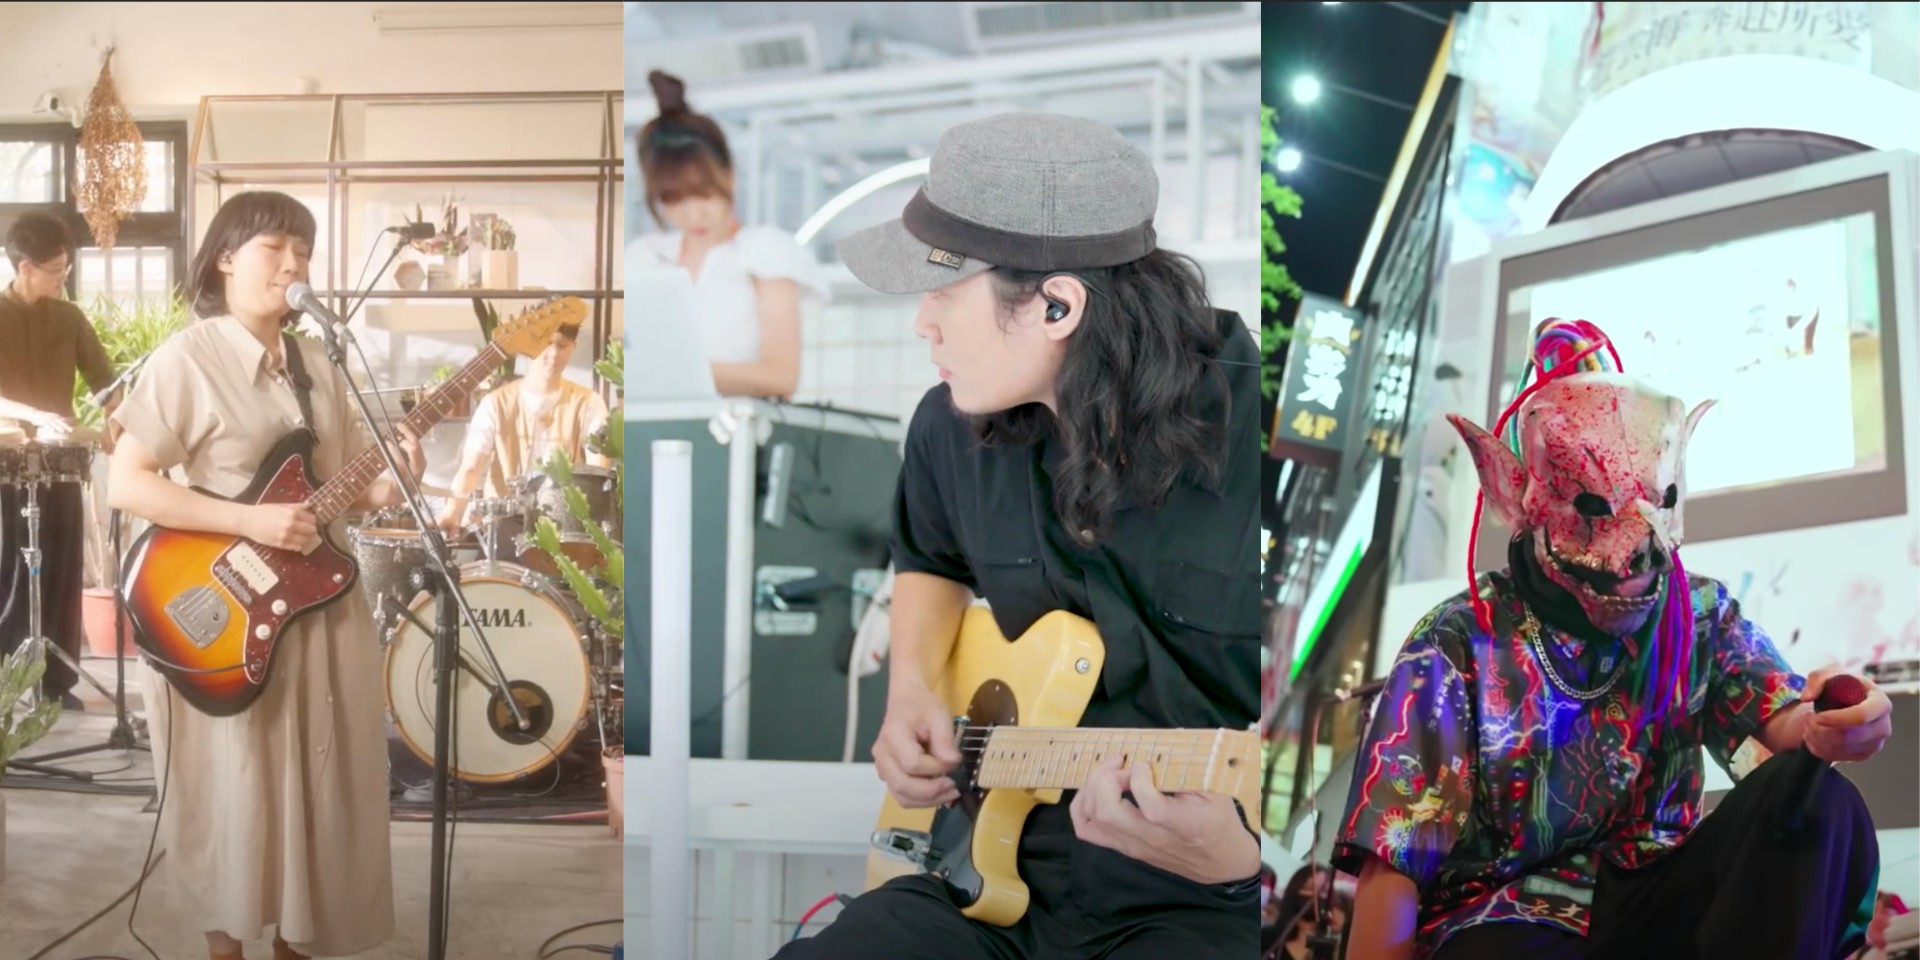 Go on a Taipei music trip with Huan Huan, Go Go Machine Orchestra, and Flesh Juicer — watch